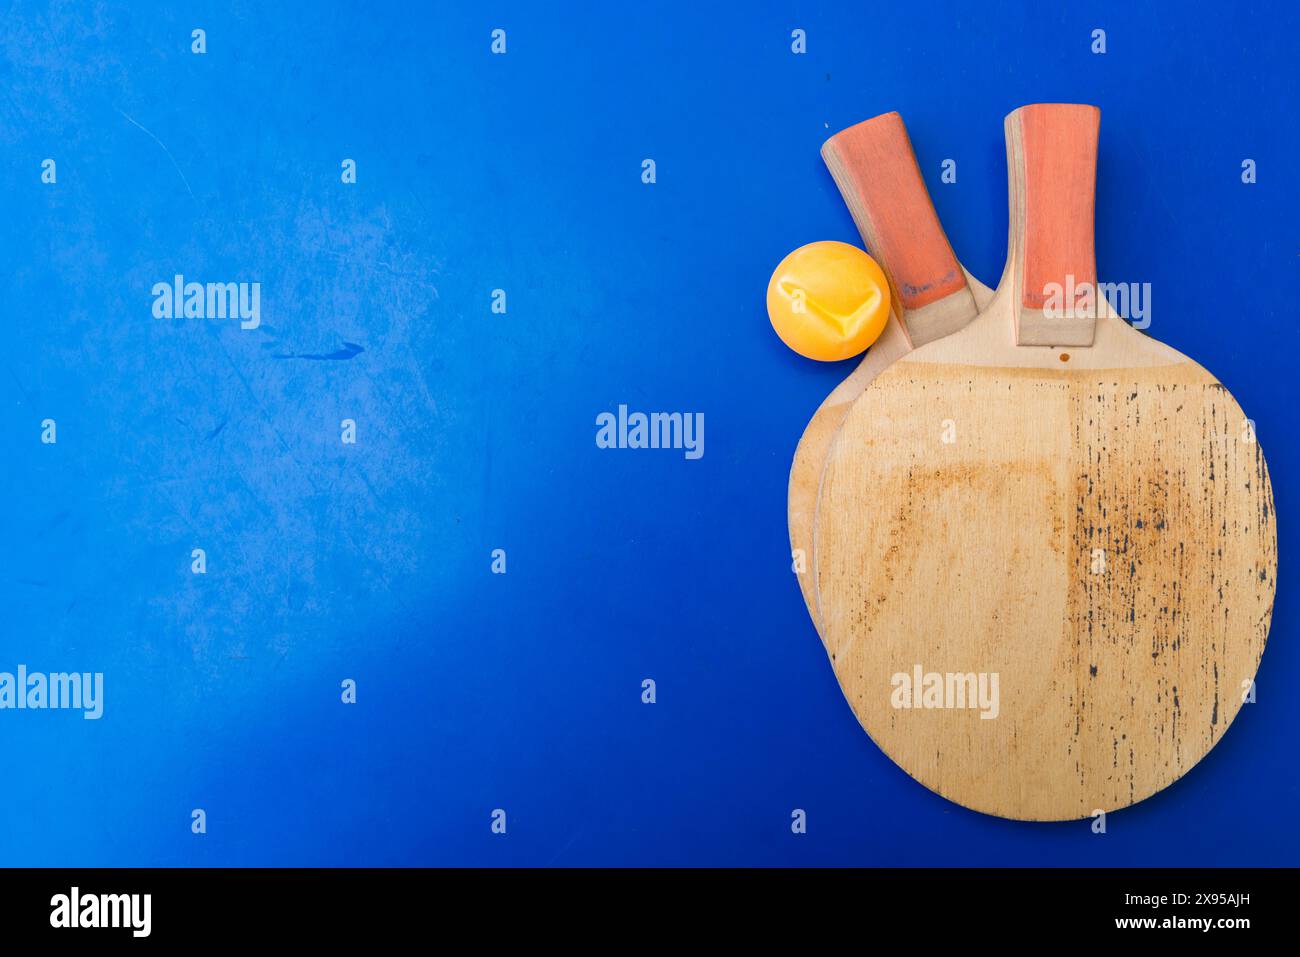 pair of old pingpong rackets and a dented ball on a blue pingpong table Stock Photo